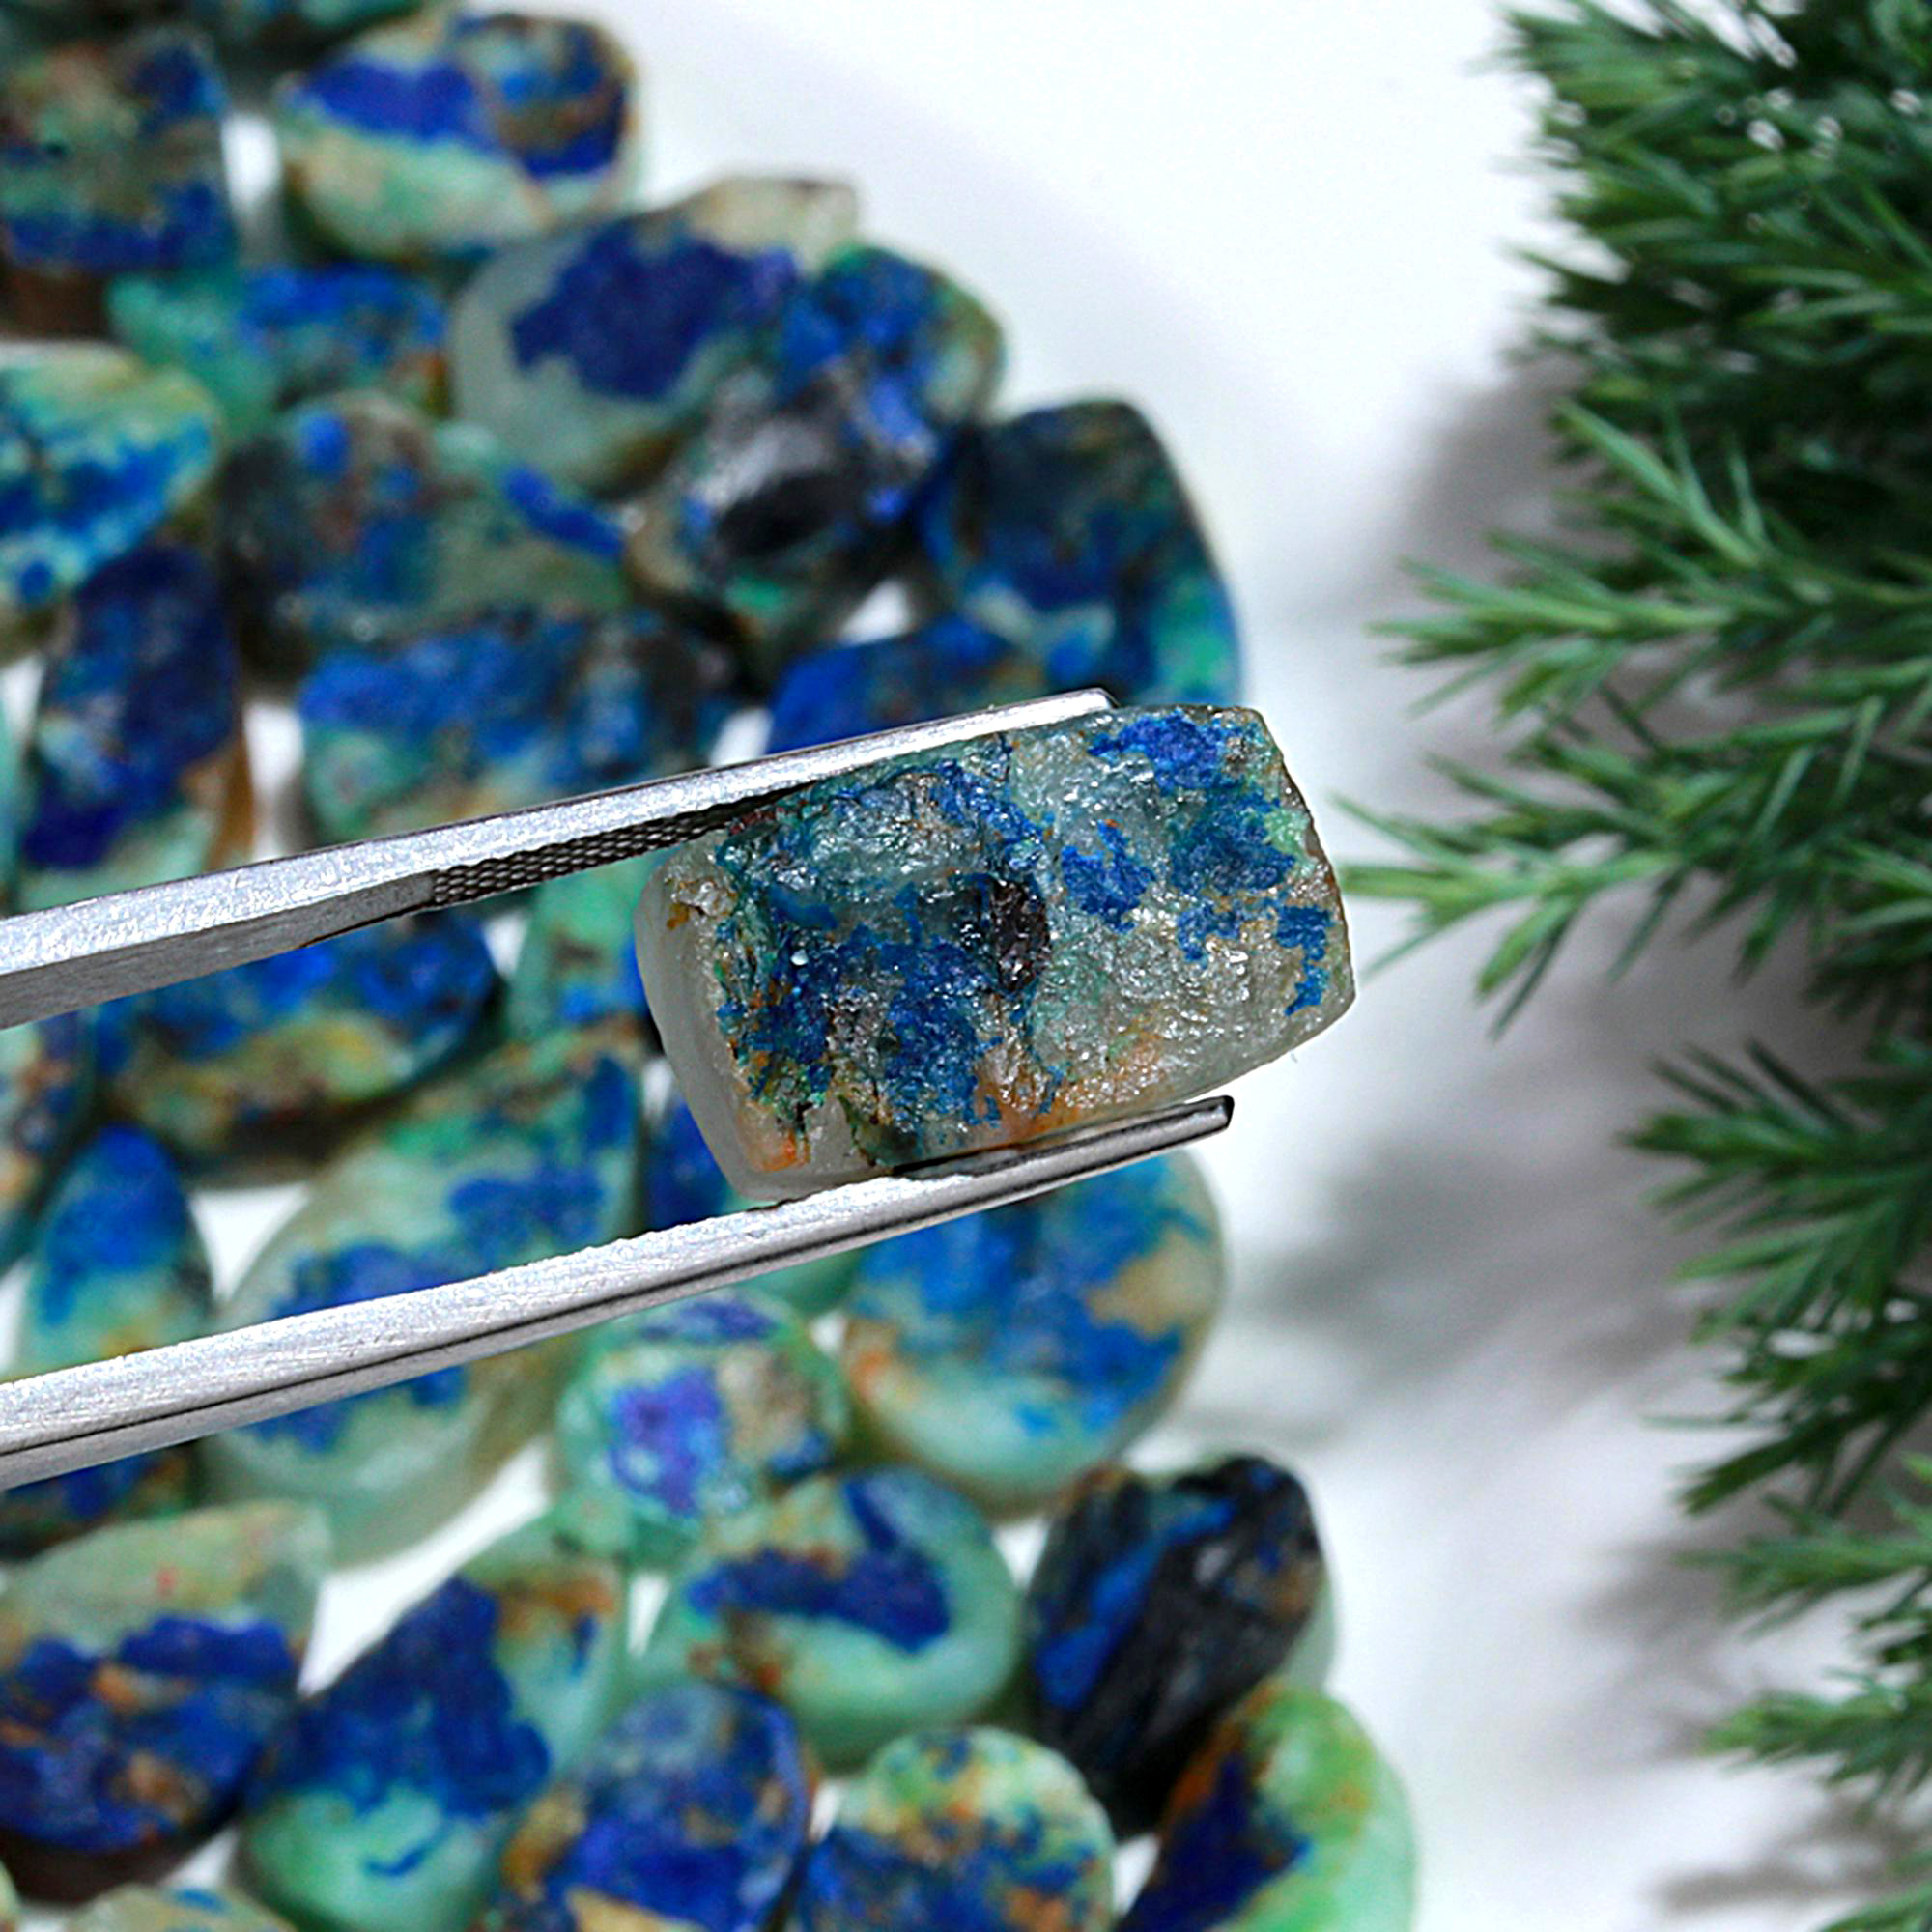 110 Pcs 630.Cts Natural Azurite Druzy Unpolished Loose Cabochon Gemstone For Jewelry Wholesale Lot Size 24x11 10x12mm